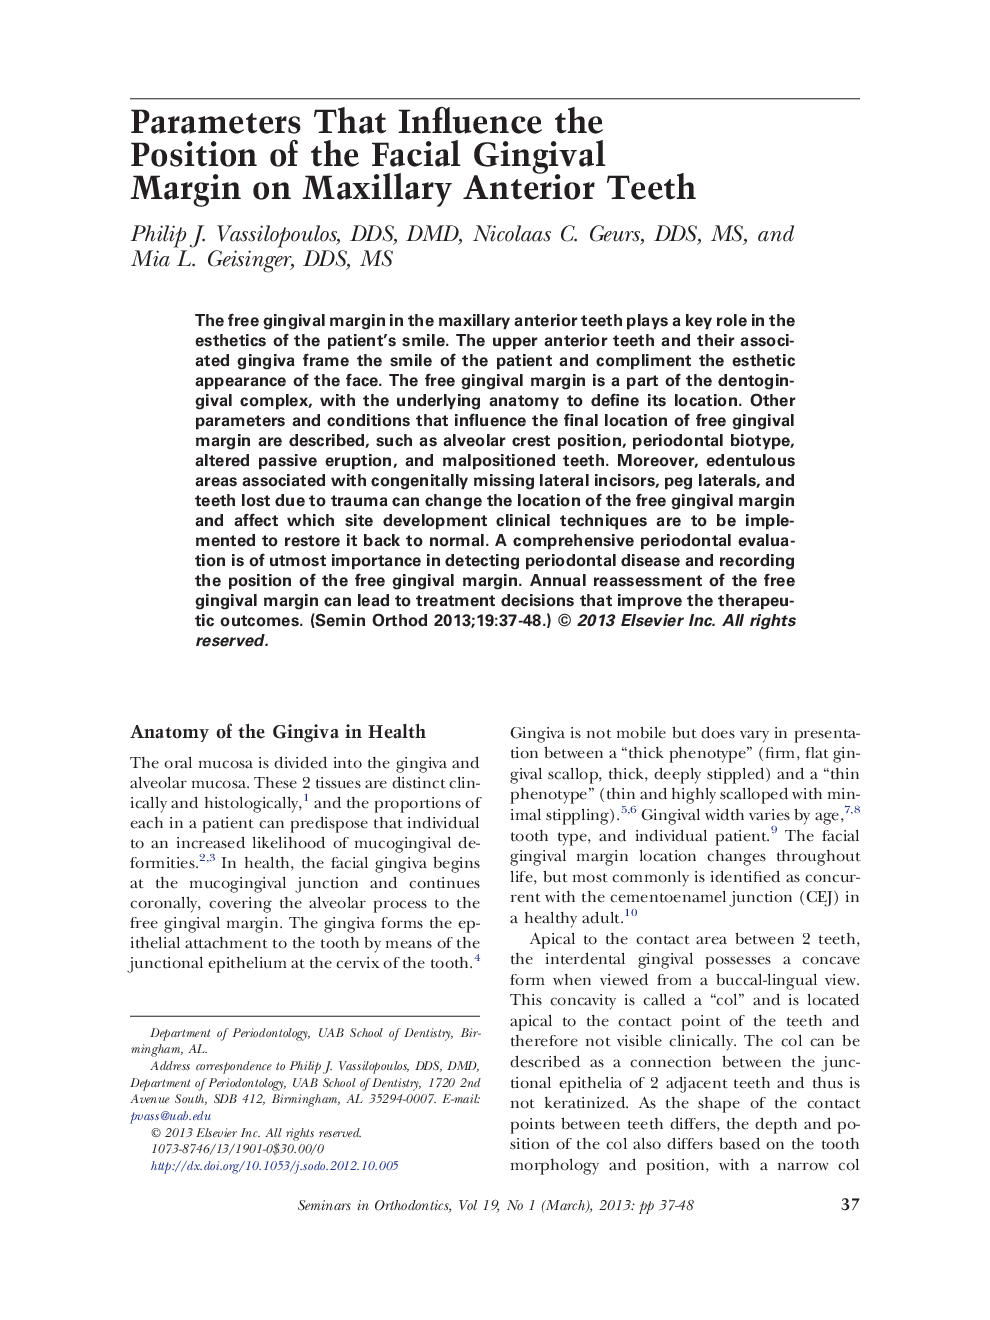 Parameters That Influence the Position of the Facial Gingival Margin on Maxillary Anterior Teeth